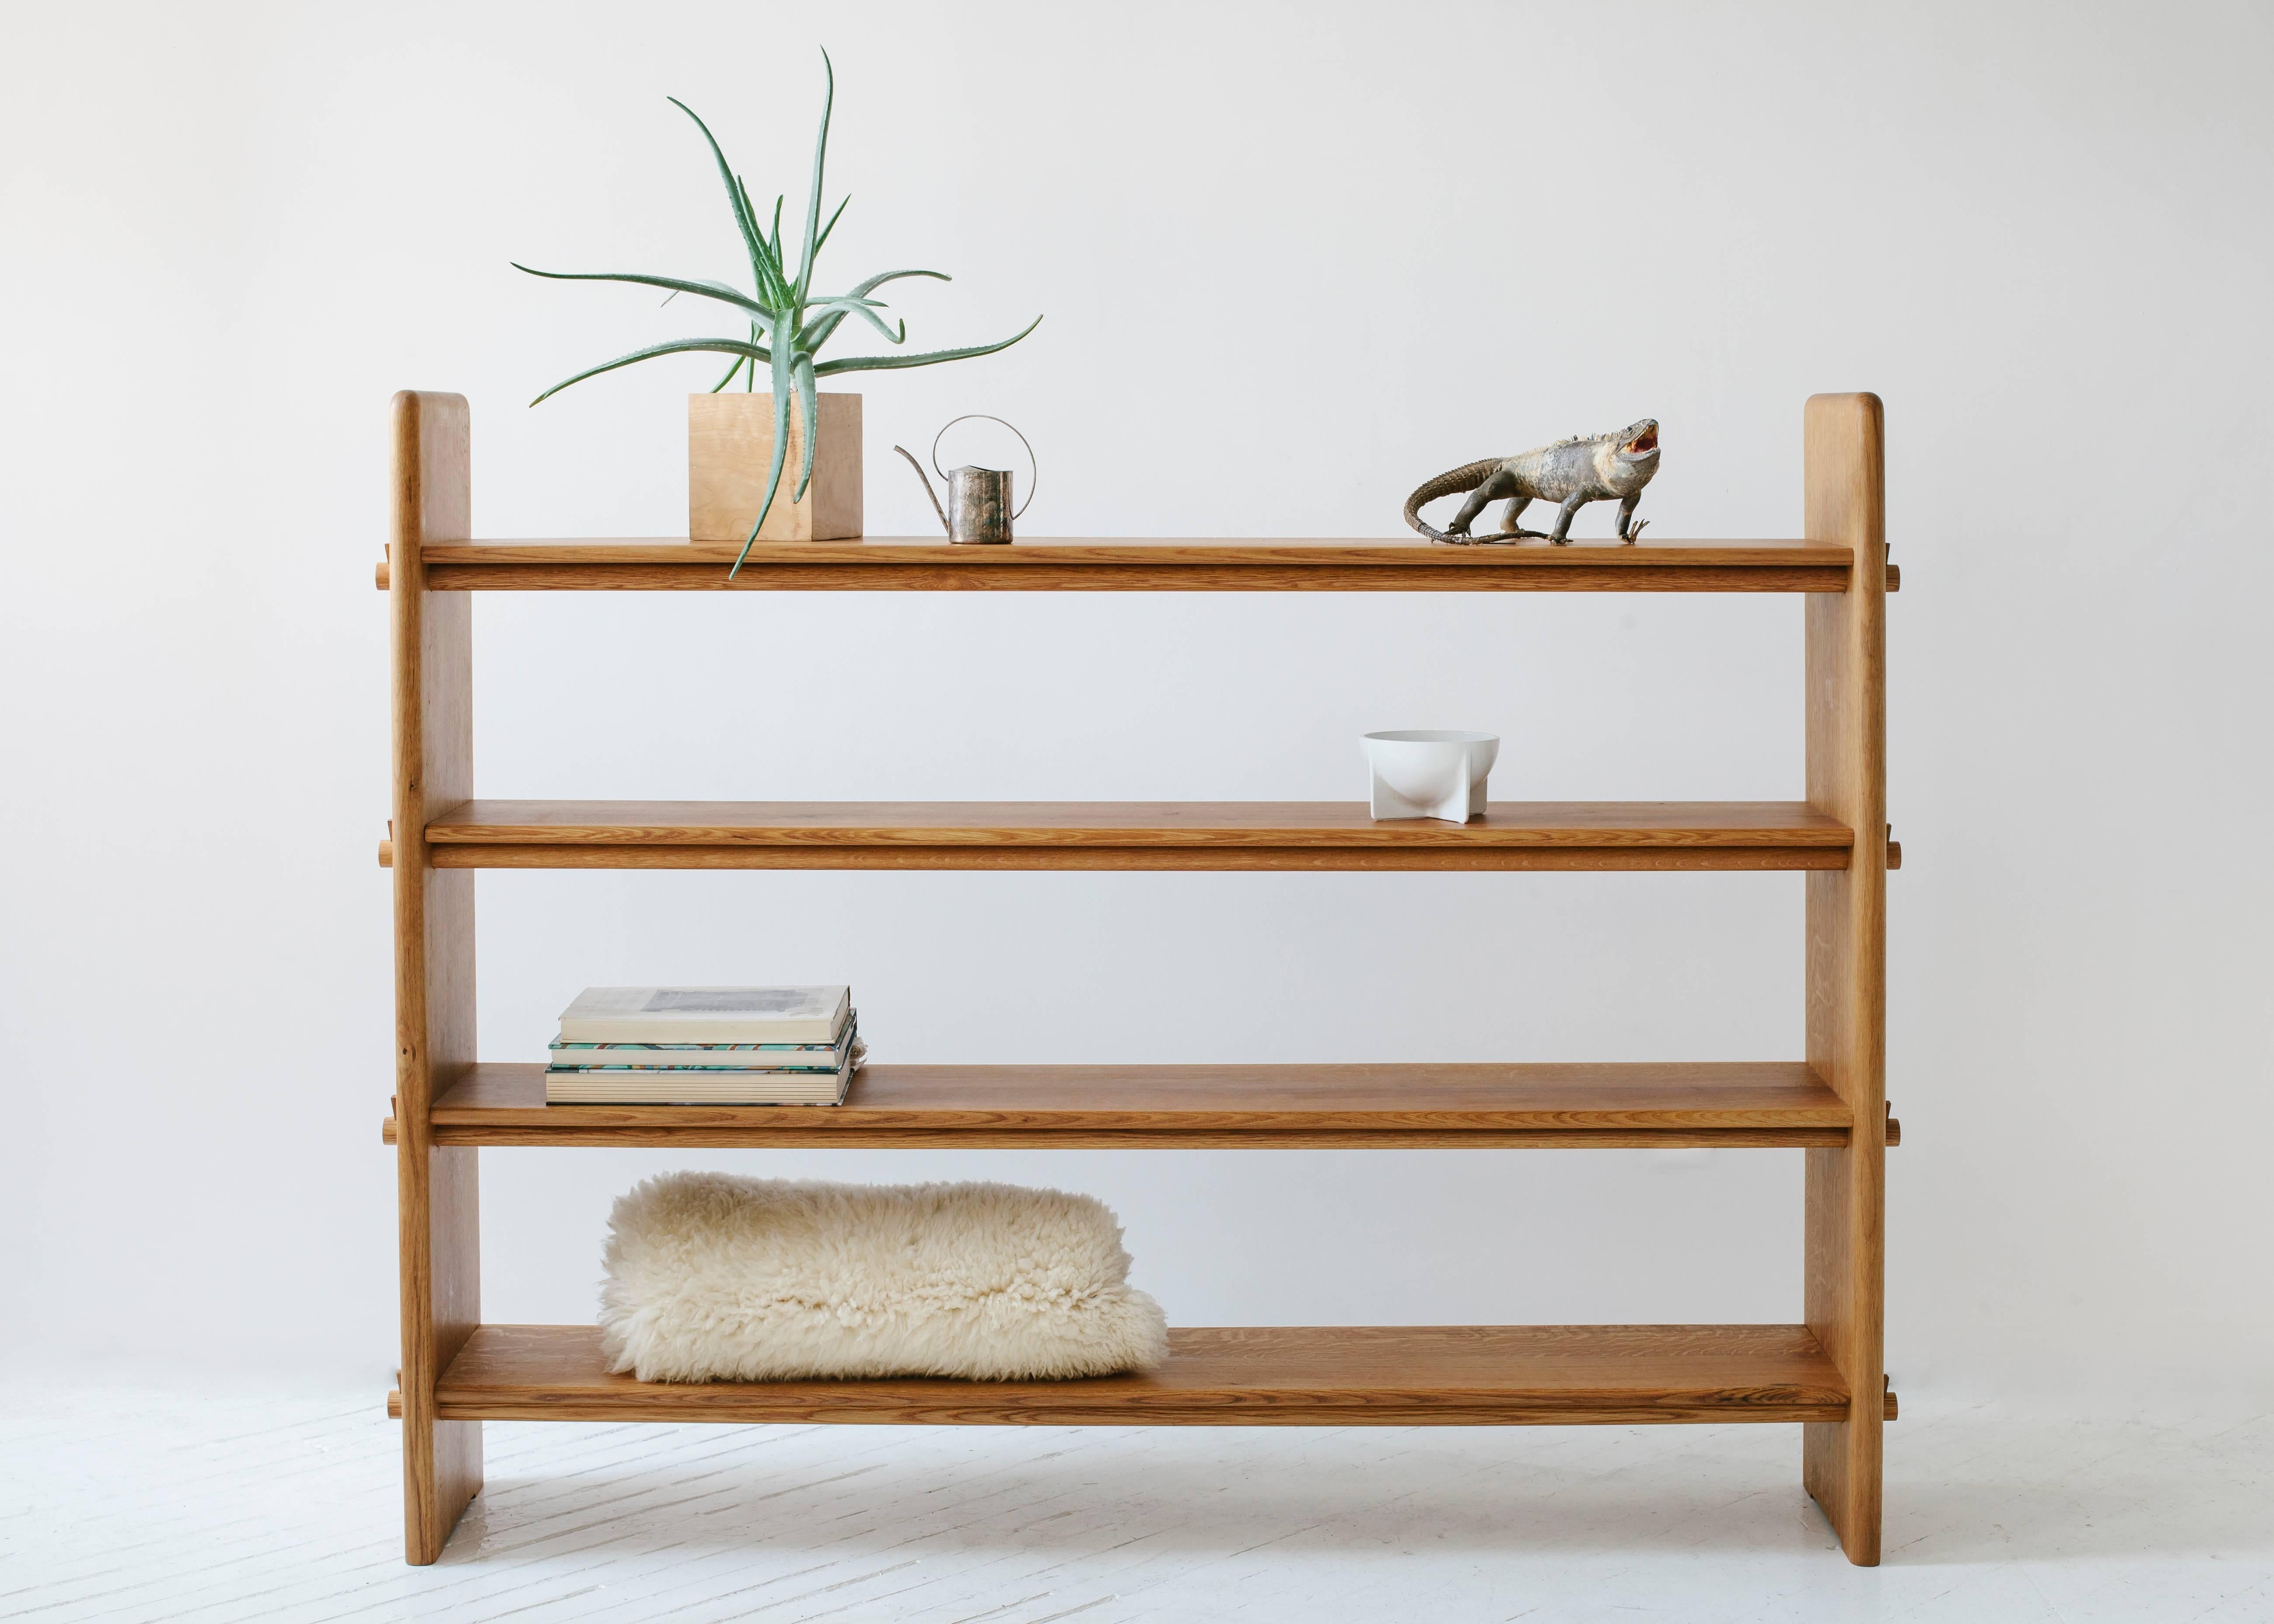 Designed with a focus on traditional joinery, there is not a single piece of metal hardware used in these white oakwood shelves. Small wooden wedges are used to hold the shelves captive between the vertical sides through sheer tension.